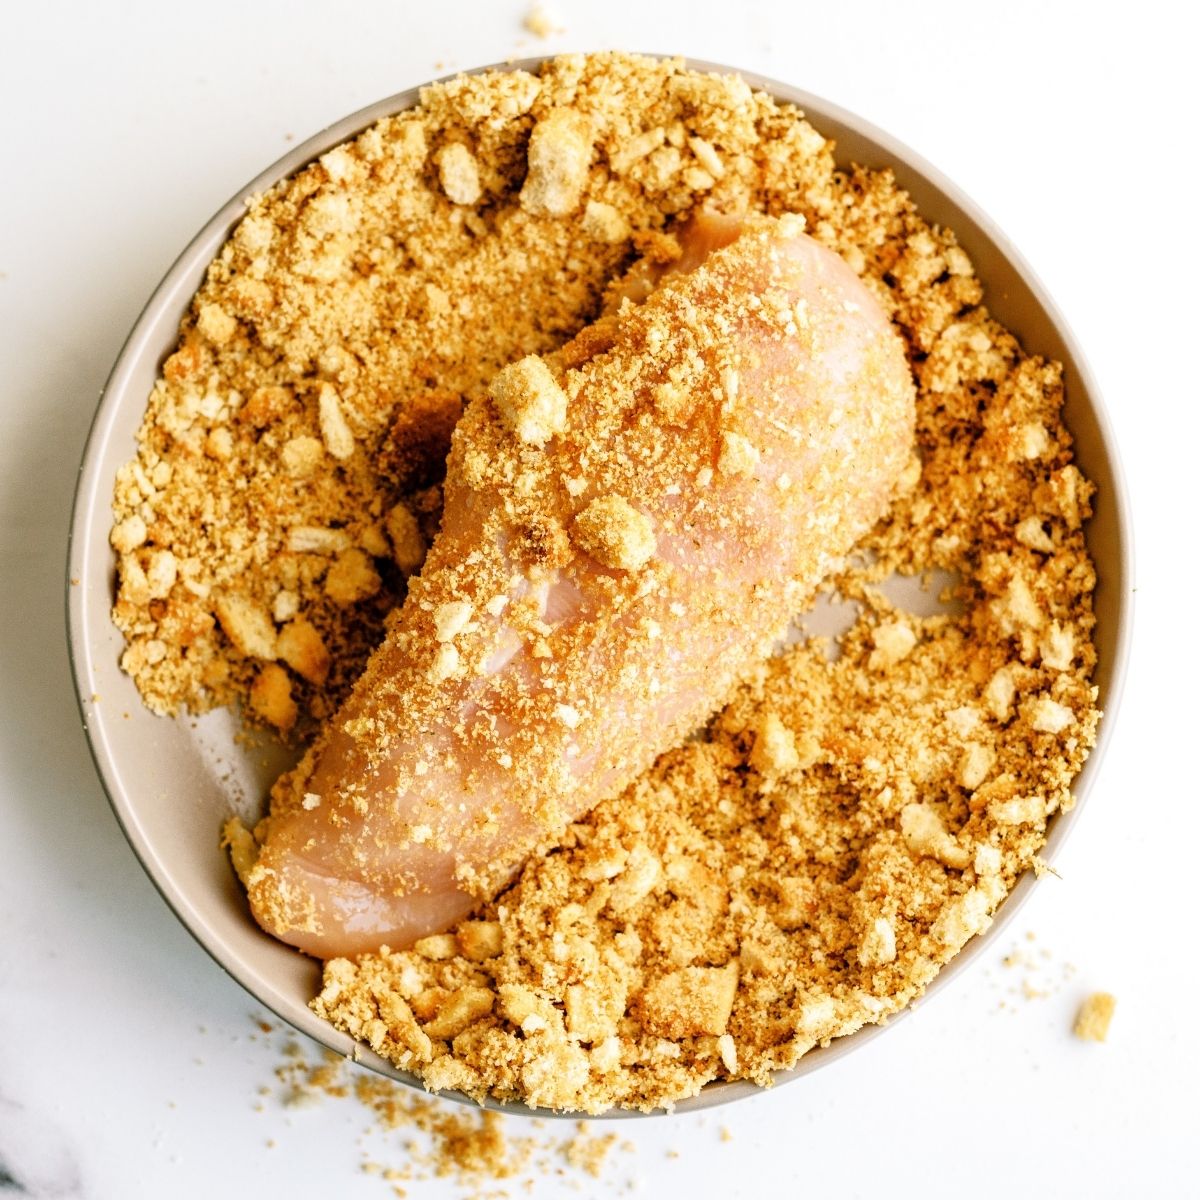 Dipping raw chicken breast in crouton crumbs